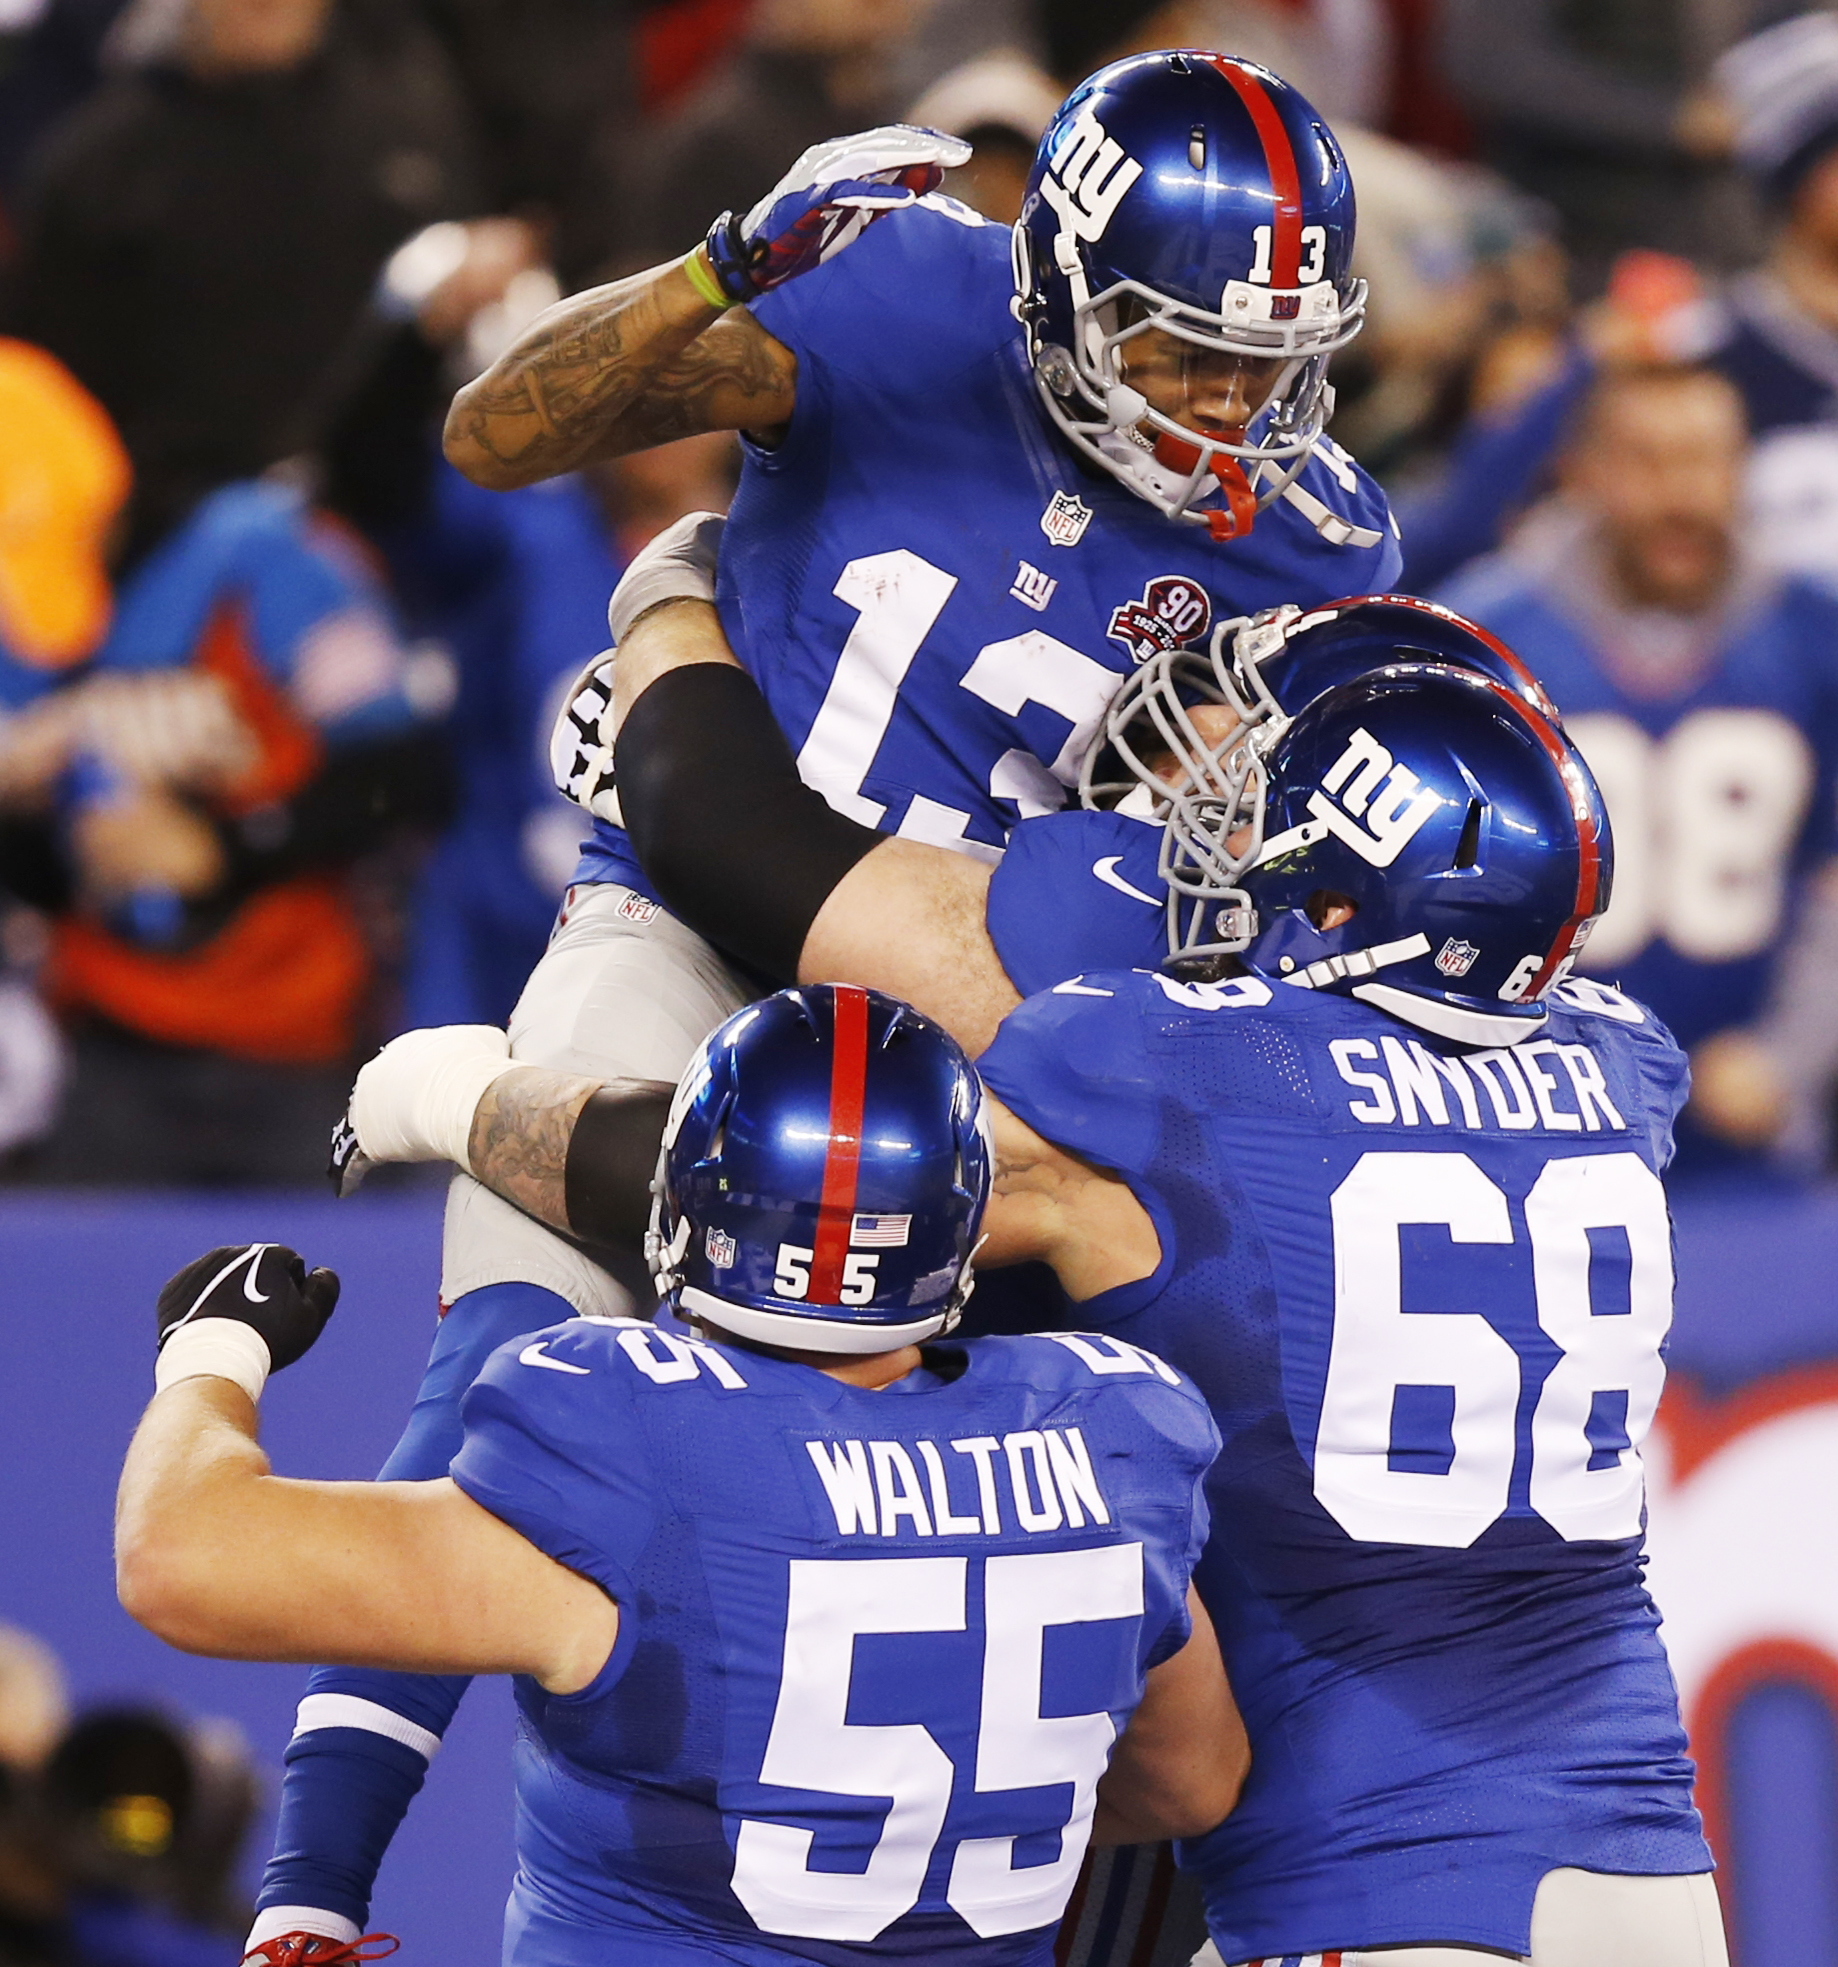 PHOTO: New York Giants wide receiver Odell Beckham celebrates with teammates after making a touchdown catch against the Dallas Cowboys in the second quarter of an NFL football game, Nov. 23, 2014, in East Rutherford, N.J.